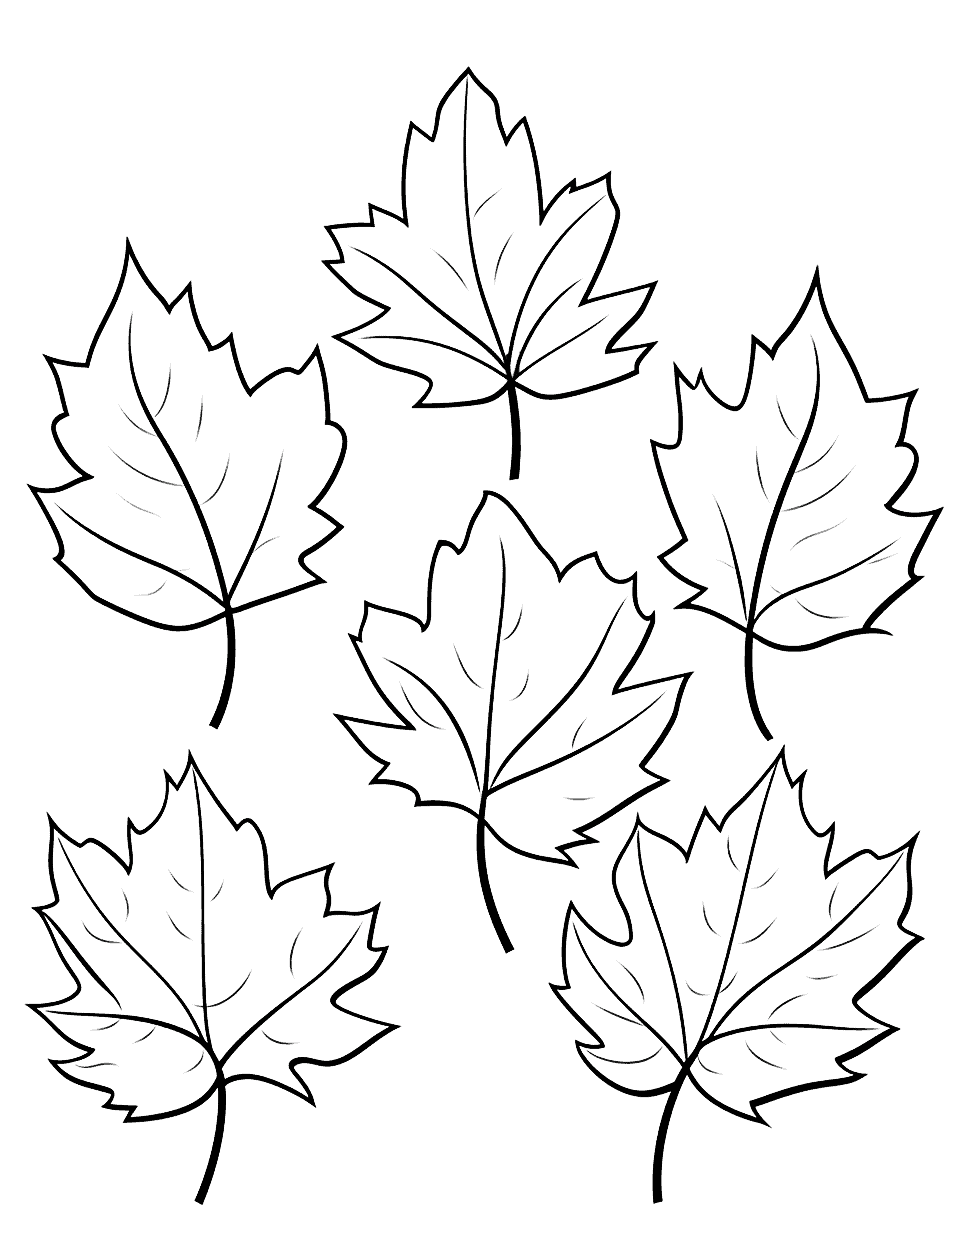 Easy Fall Leaves for Toddlers Coloring Page - An easy coloring page for toddlers featuring large, simple autumn leaves.